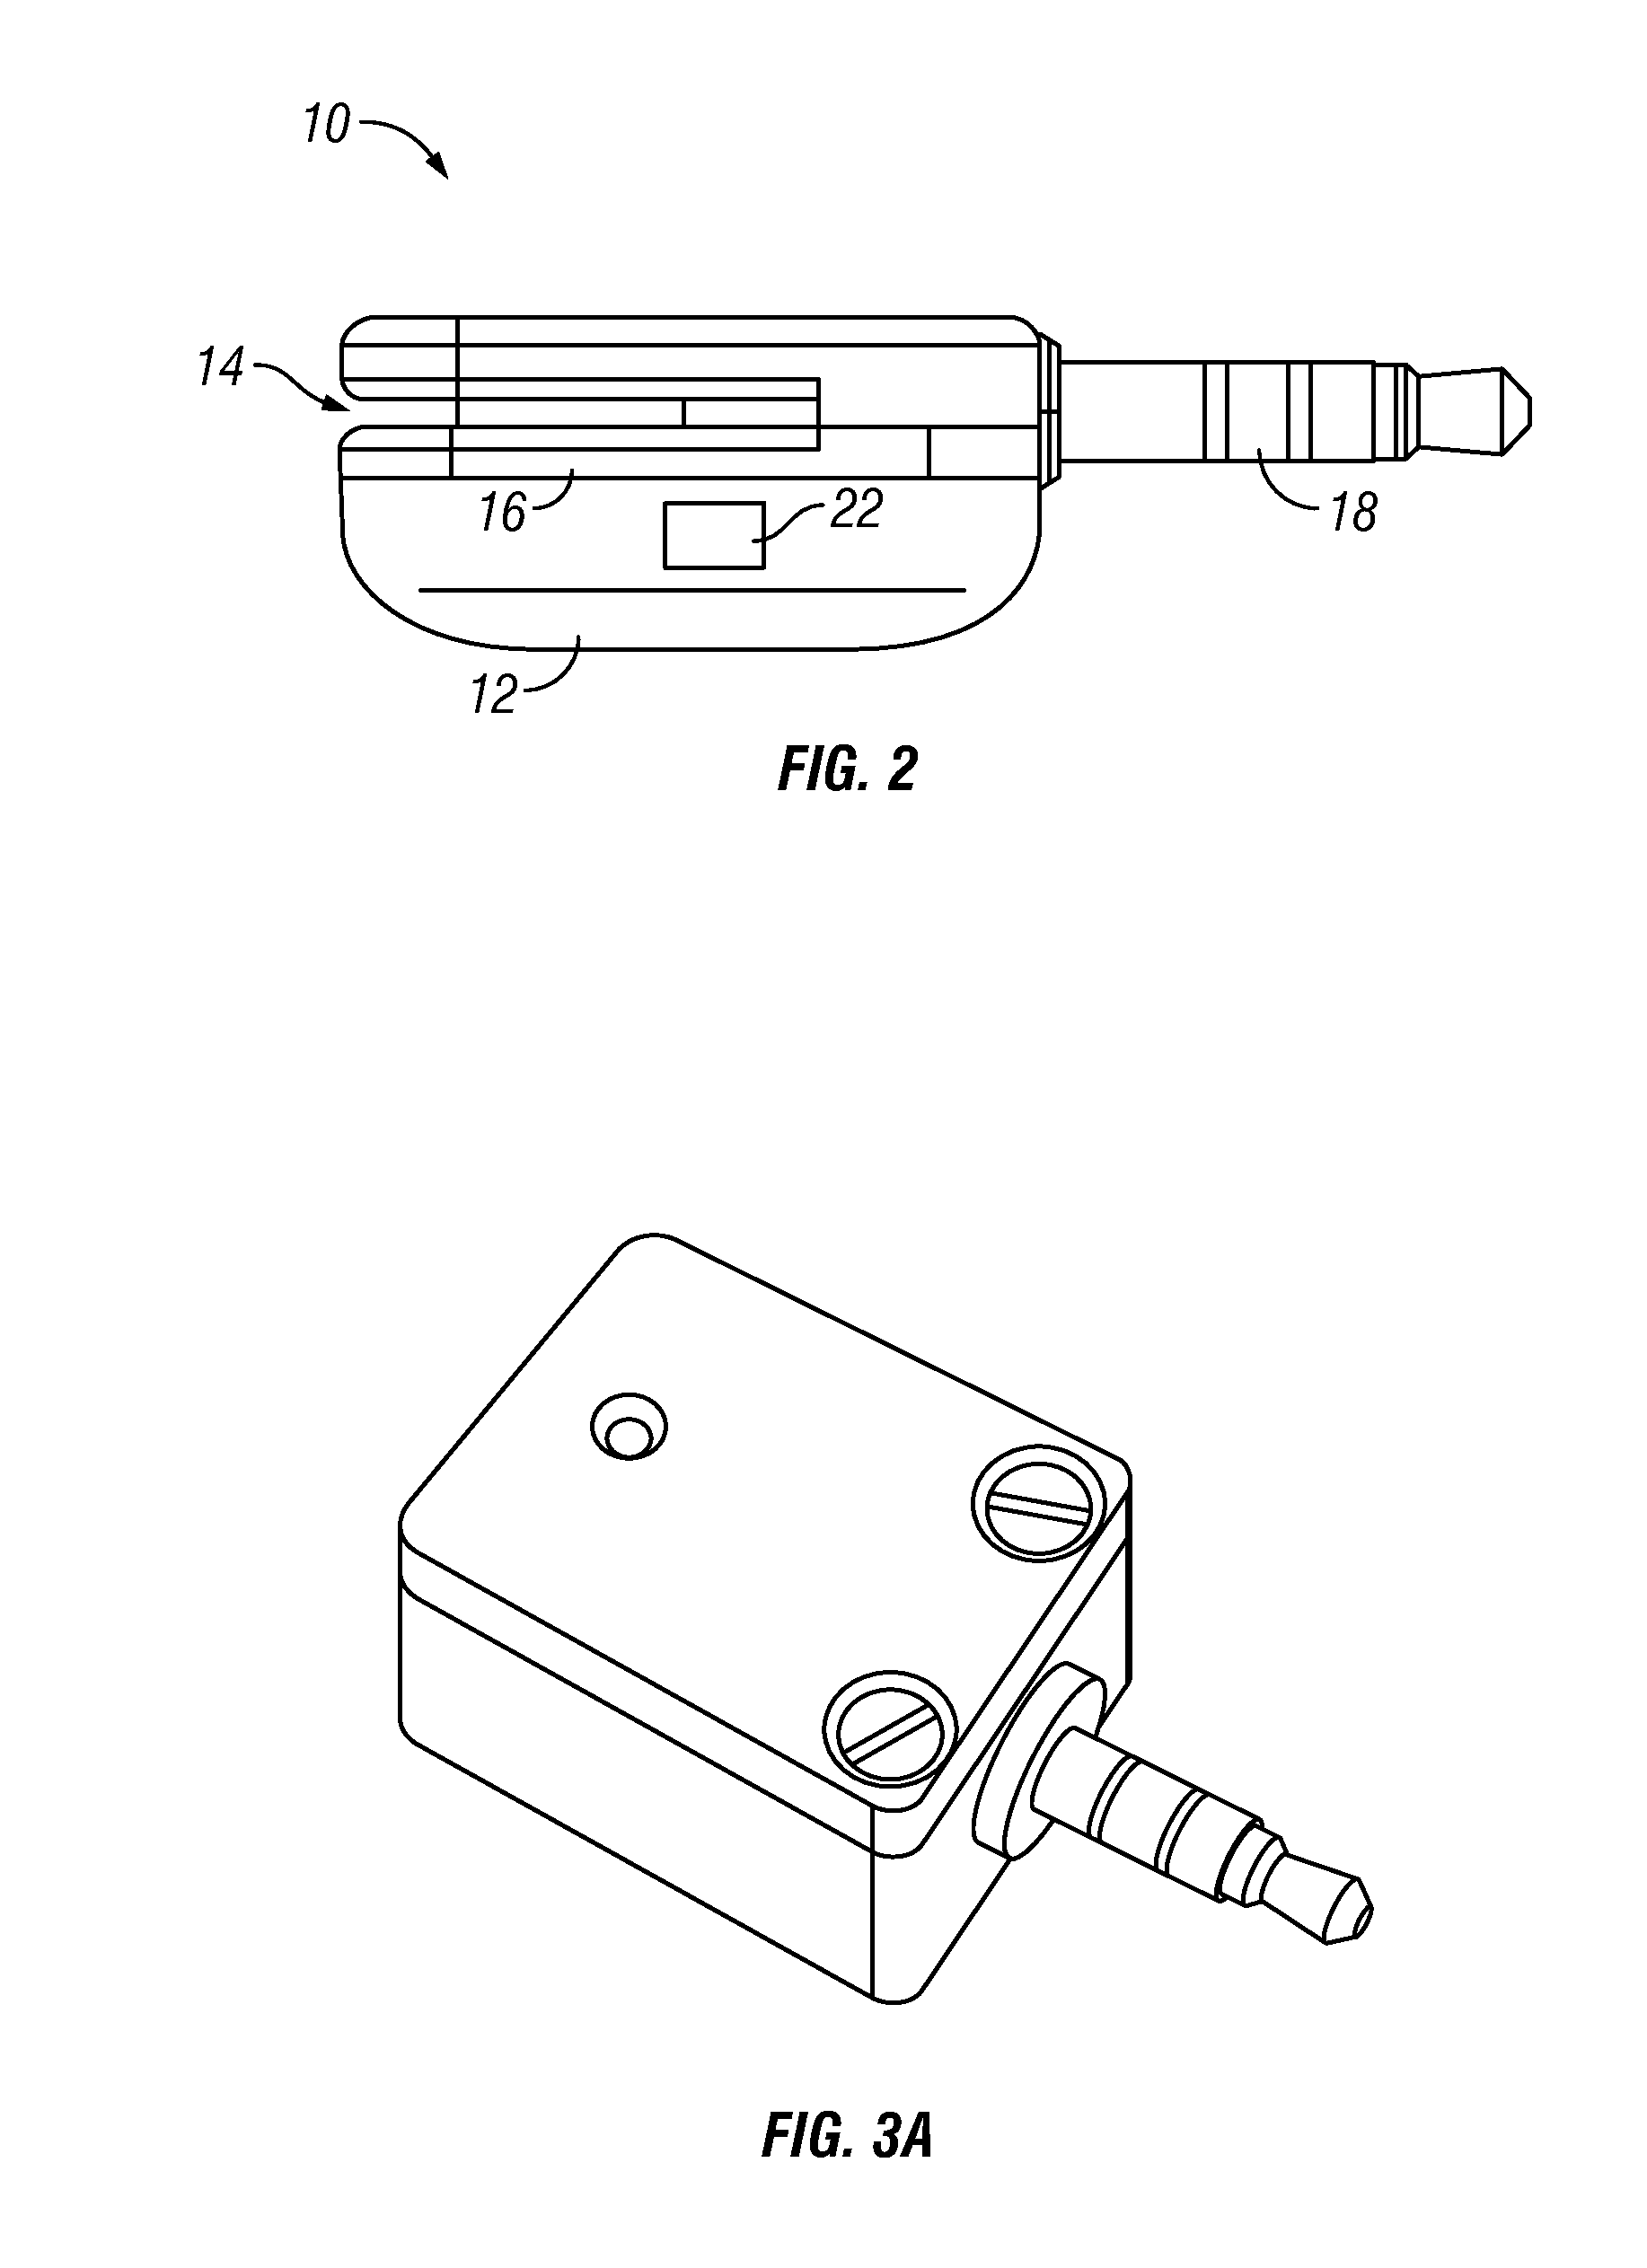 Systems and methods for financial transaction through miniaturized card reader with confirmation of payment sent to buyer